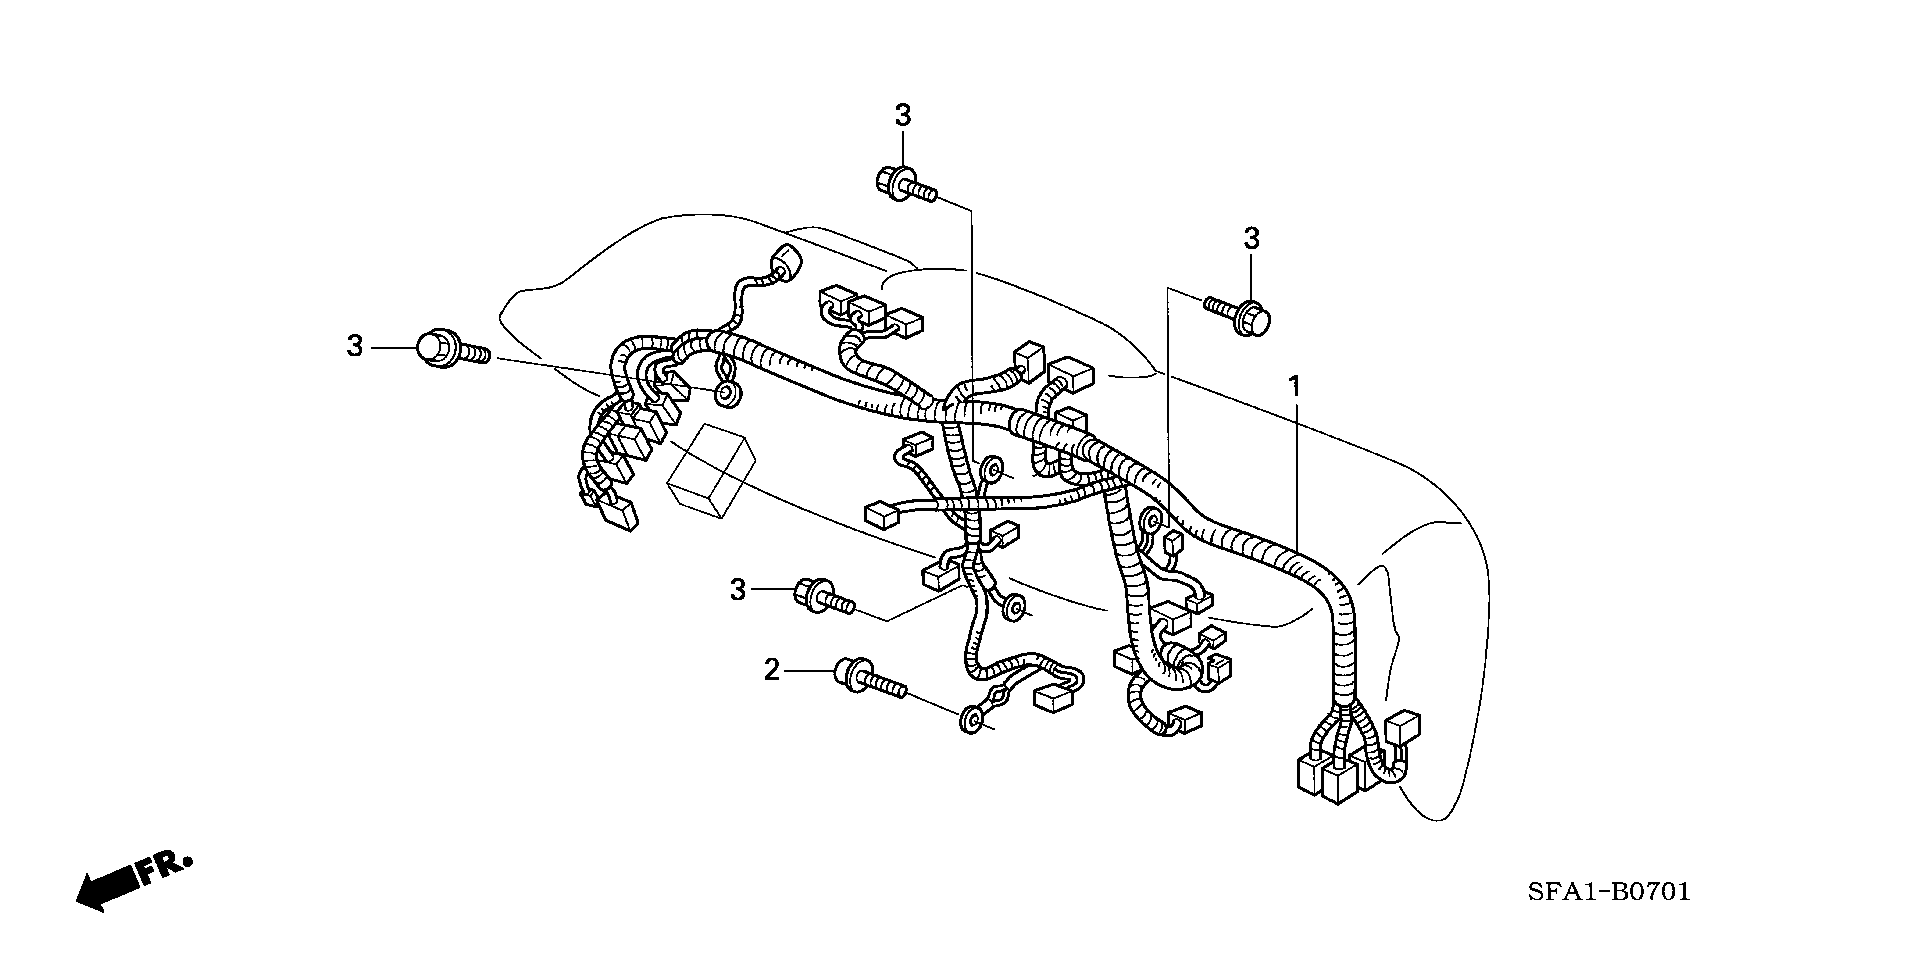 WIRE HARNESS(2)